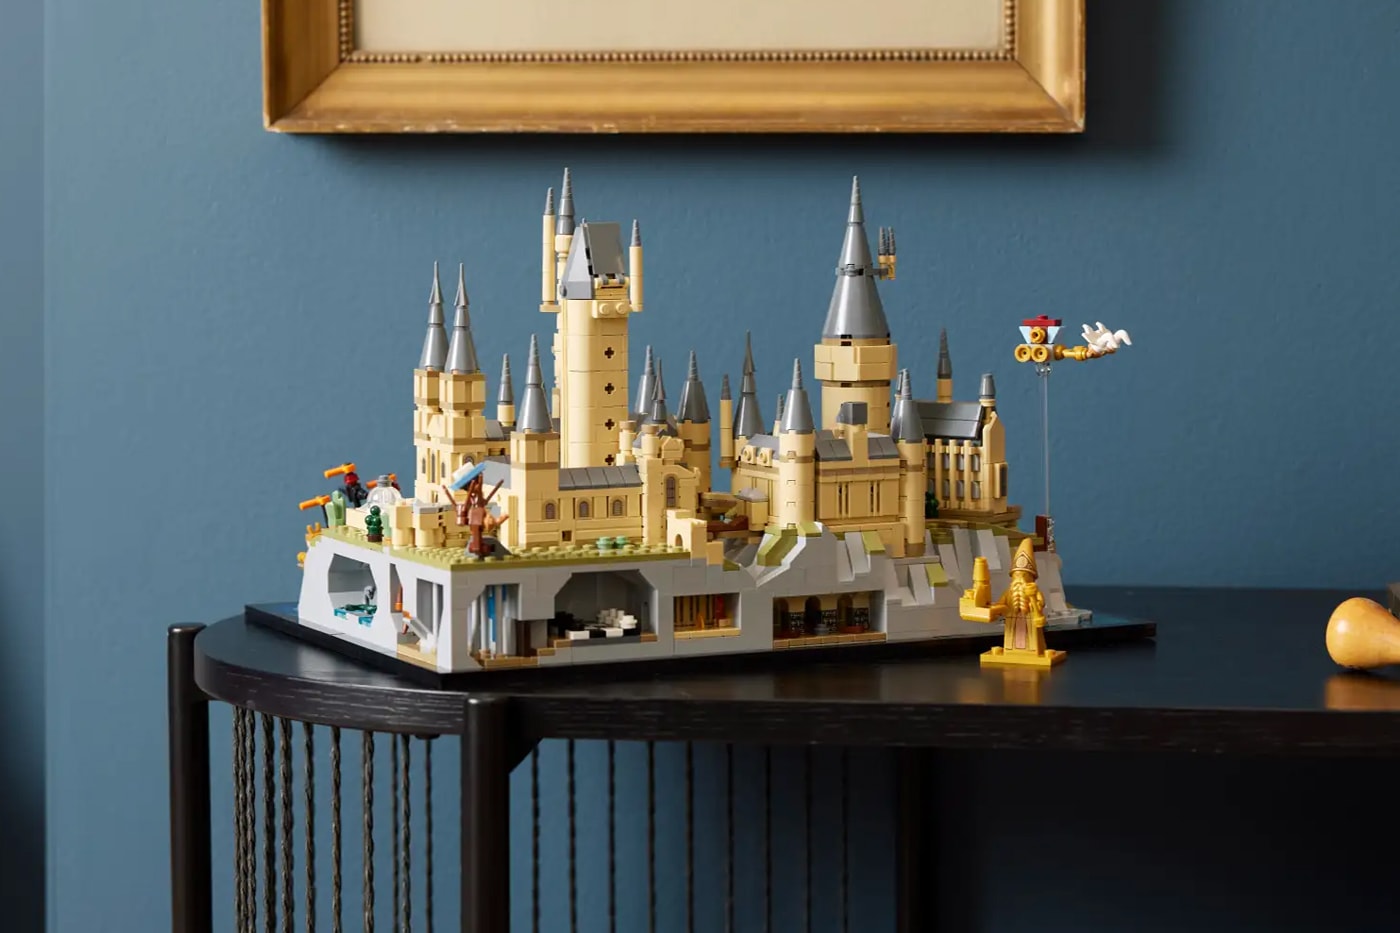 Back to Hogwarts (LEGO Harry Potter: Activity Book with Minifigure)